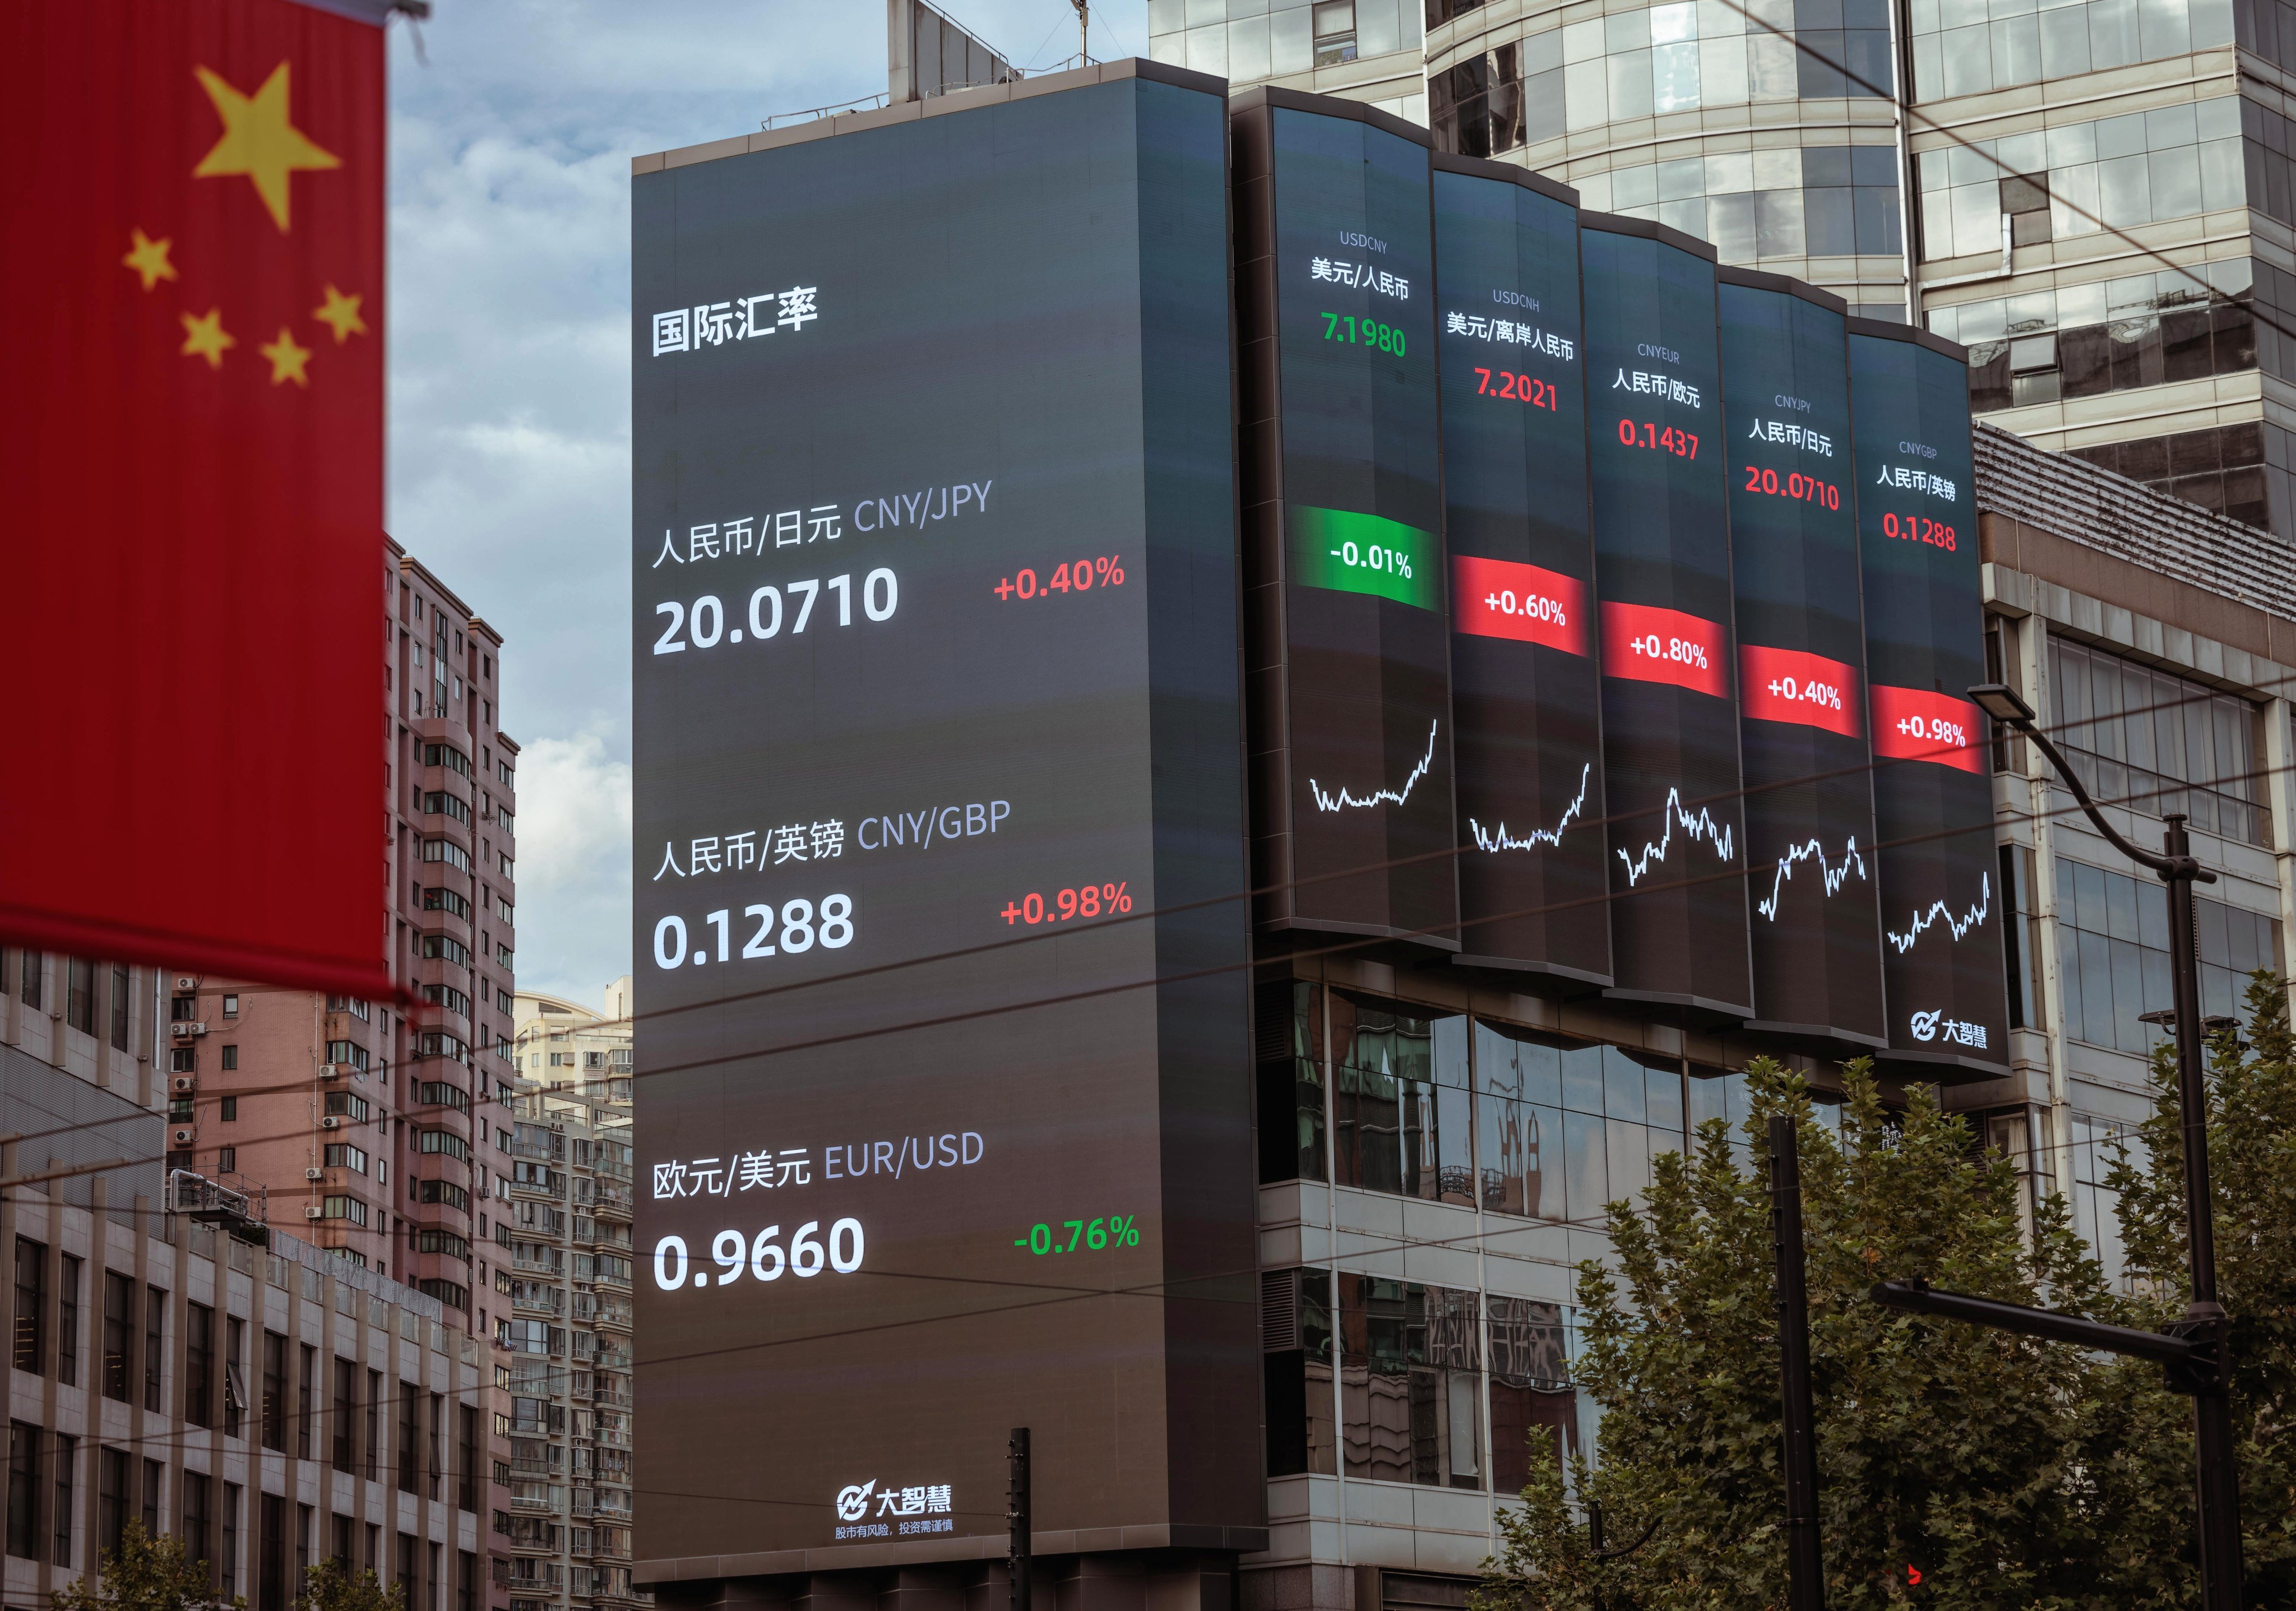 A large screen shows stock and currency exchange data in Shanghai on September 29. China’s yuan hit a record low against the US dollar on September 28, the weakest since the global financial crisis in 2008, despite the central bank taking steps to rein in the currency’s weakness. Photo: EPA-EFE